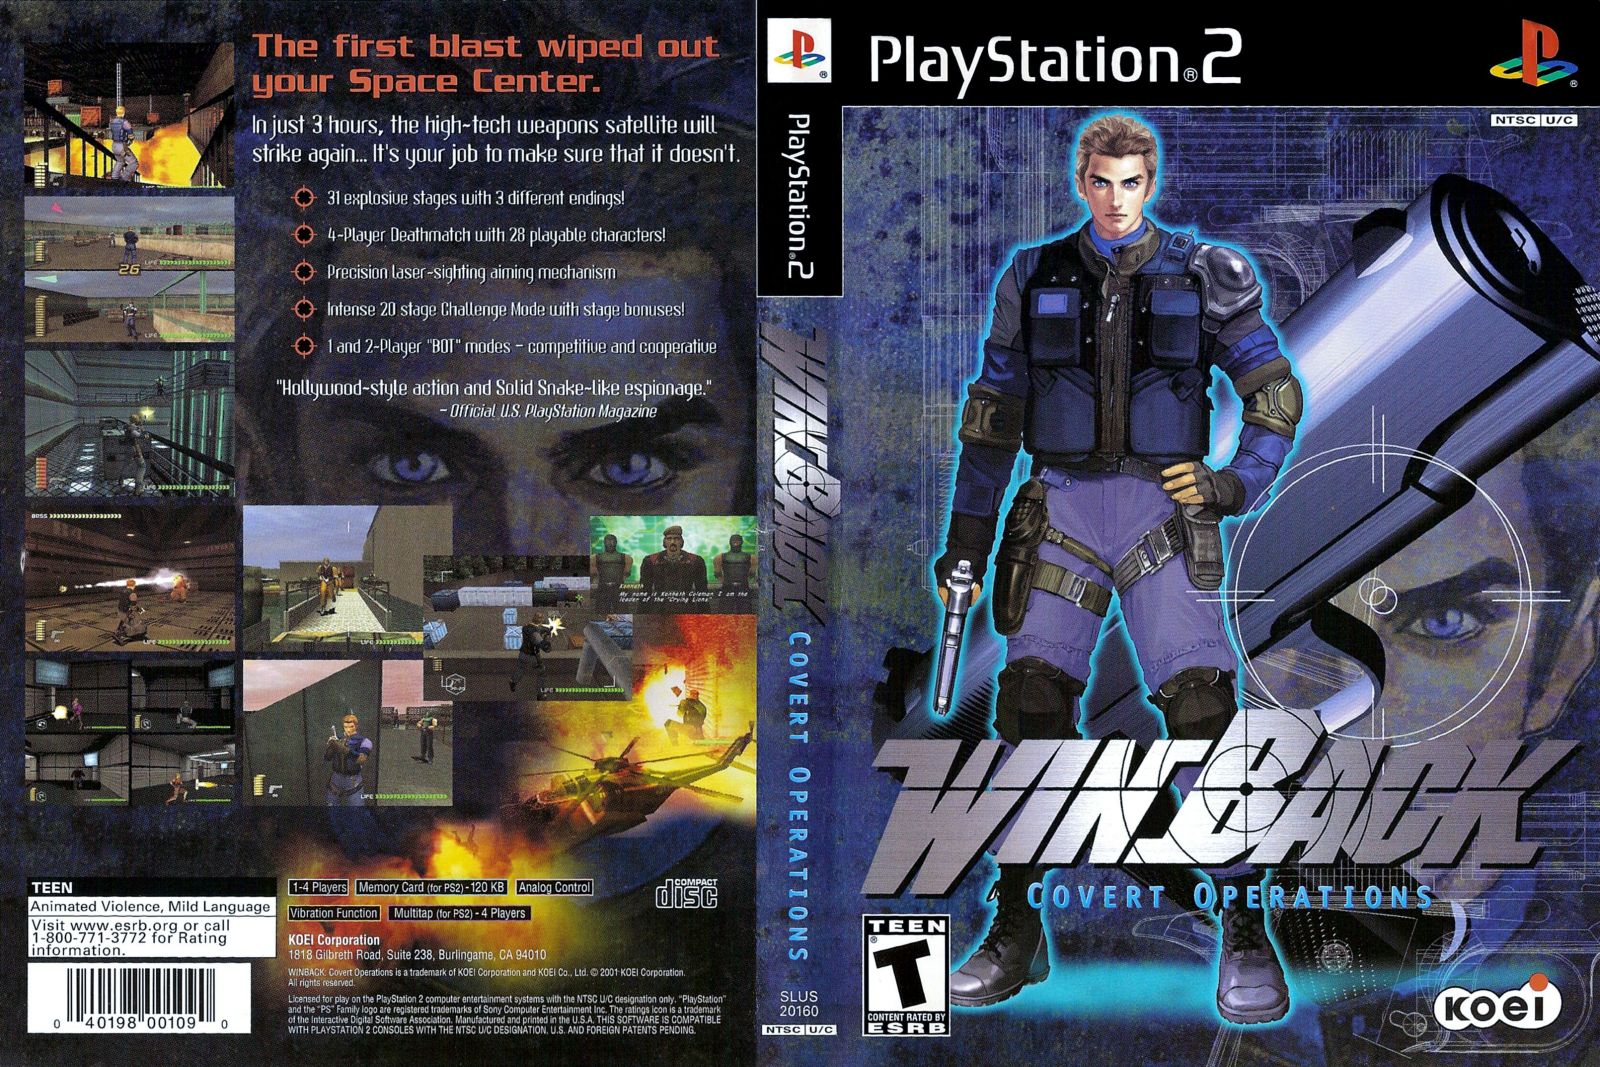 WinBack Covert Operations cover